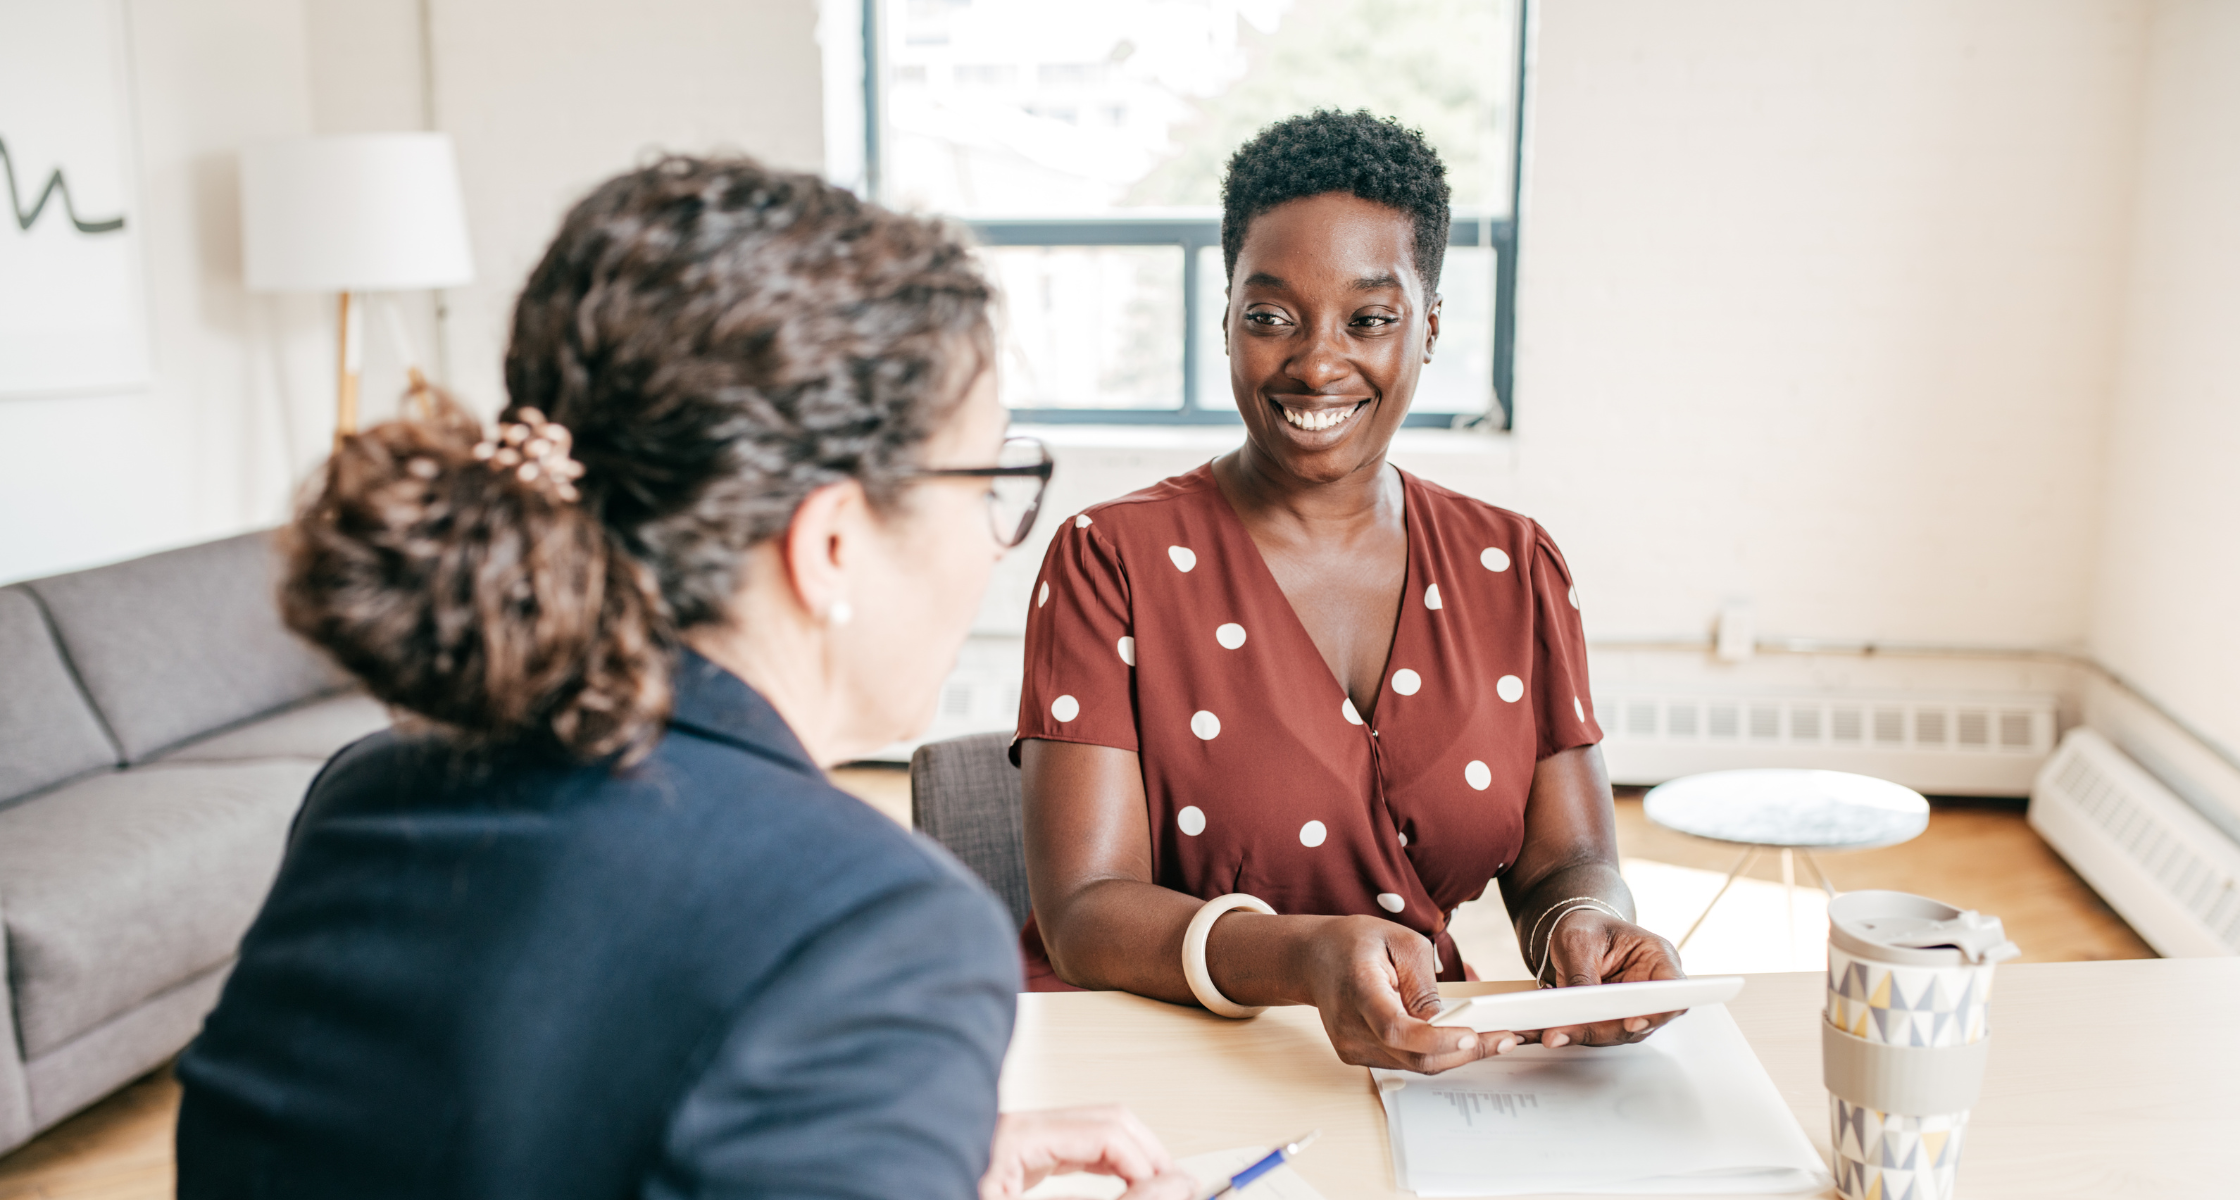 Two women at a table in an office engage in Level One conversation, displaying effective mentorship skills.